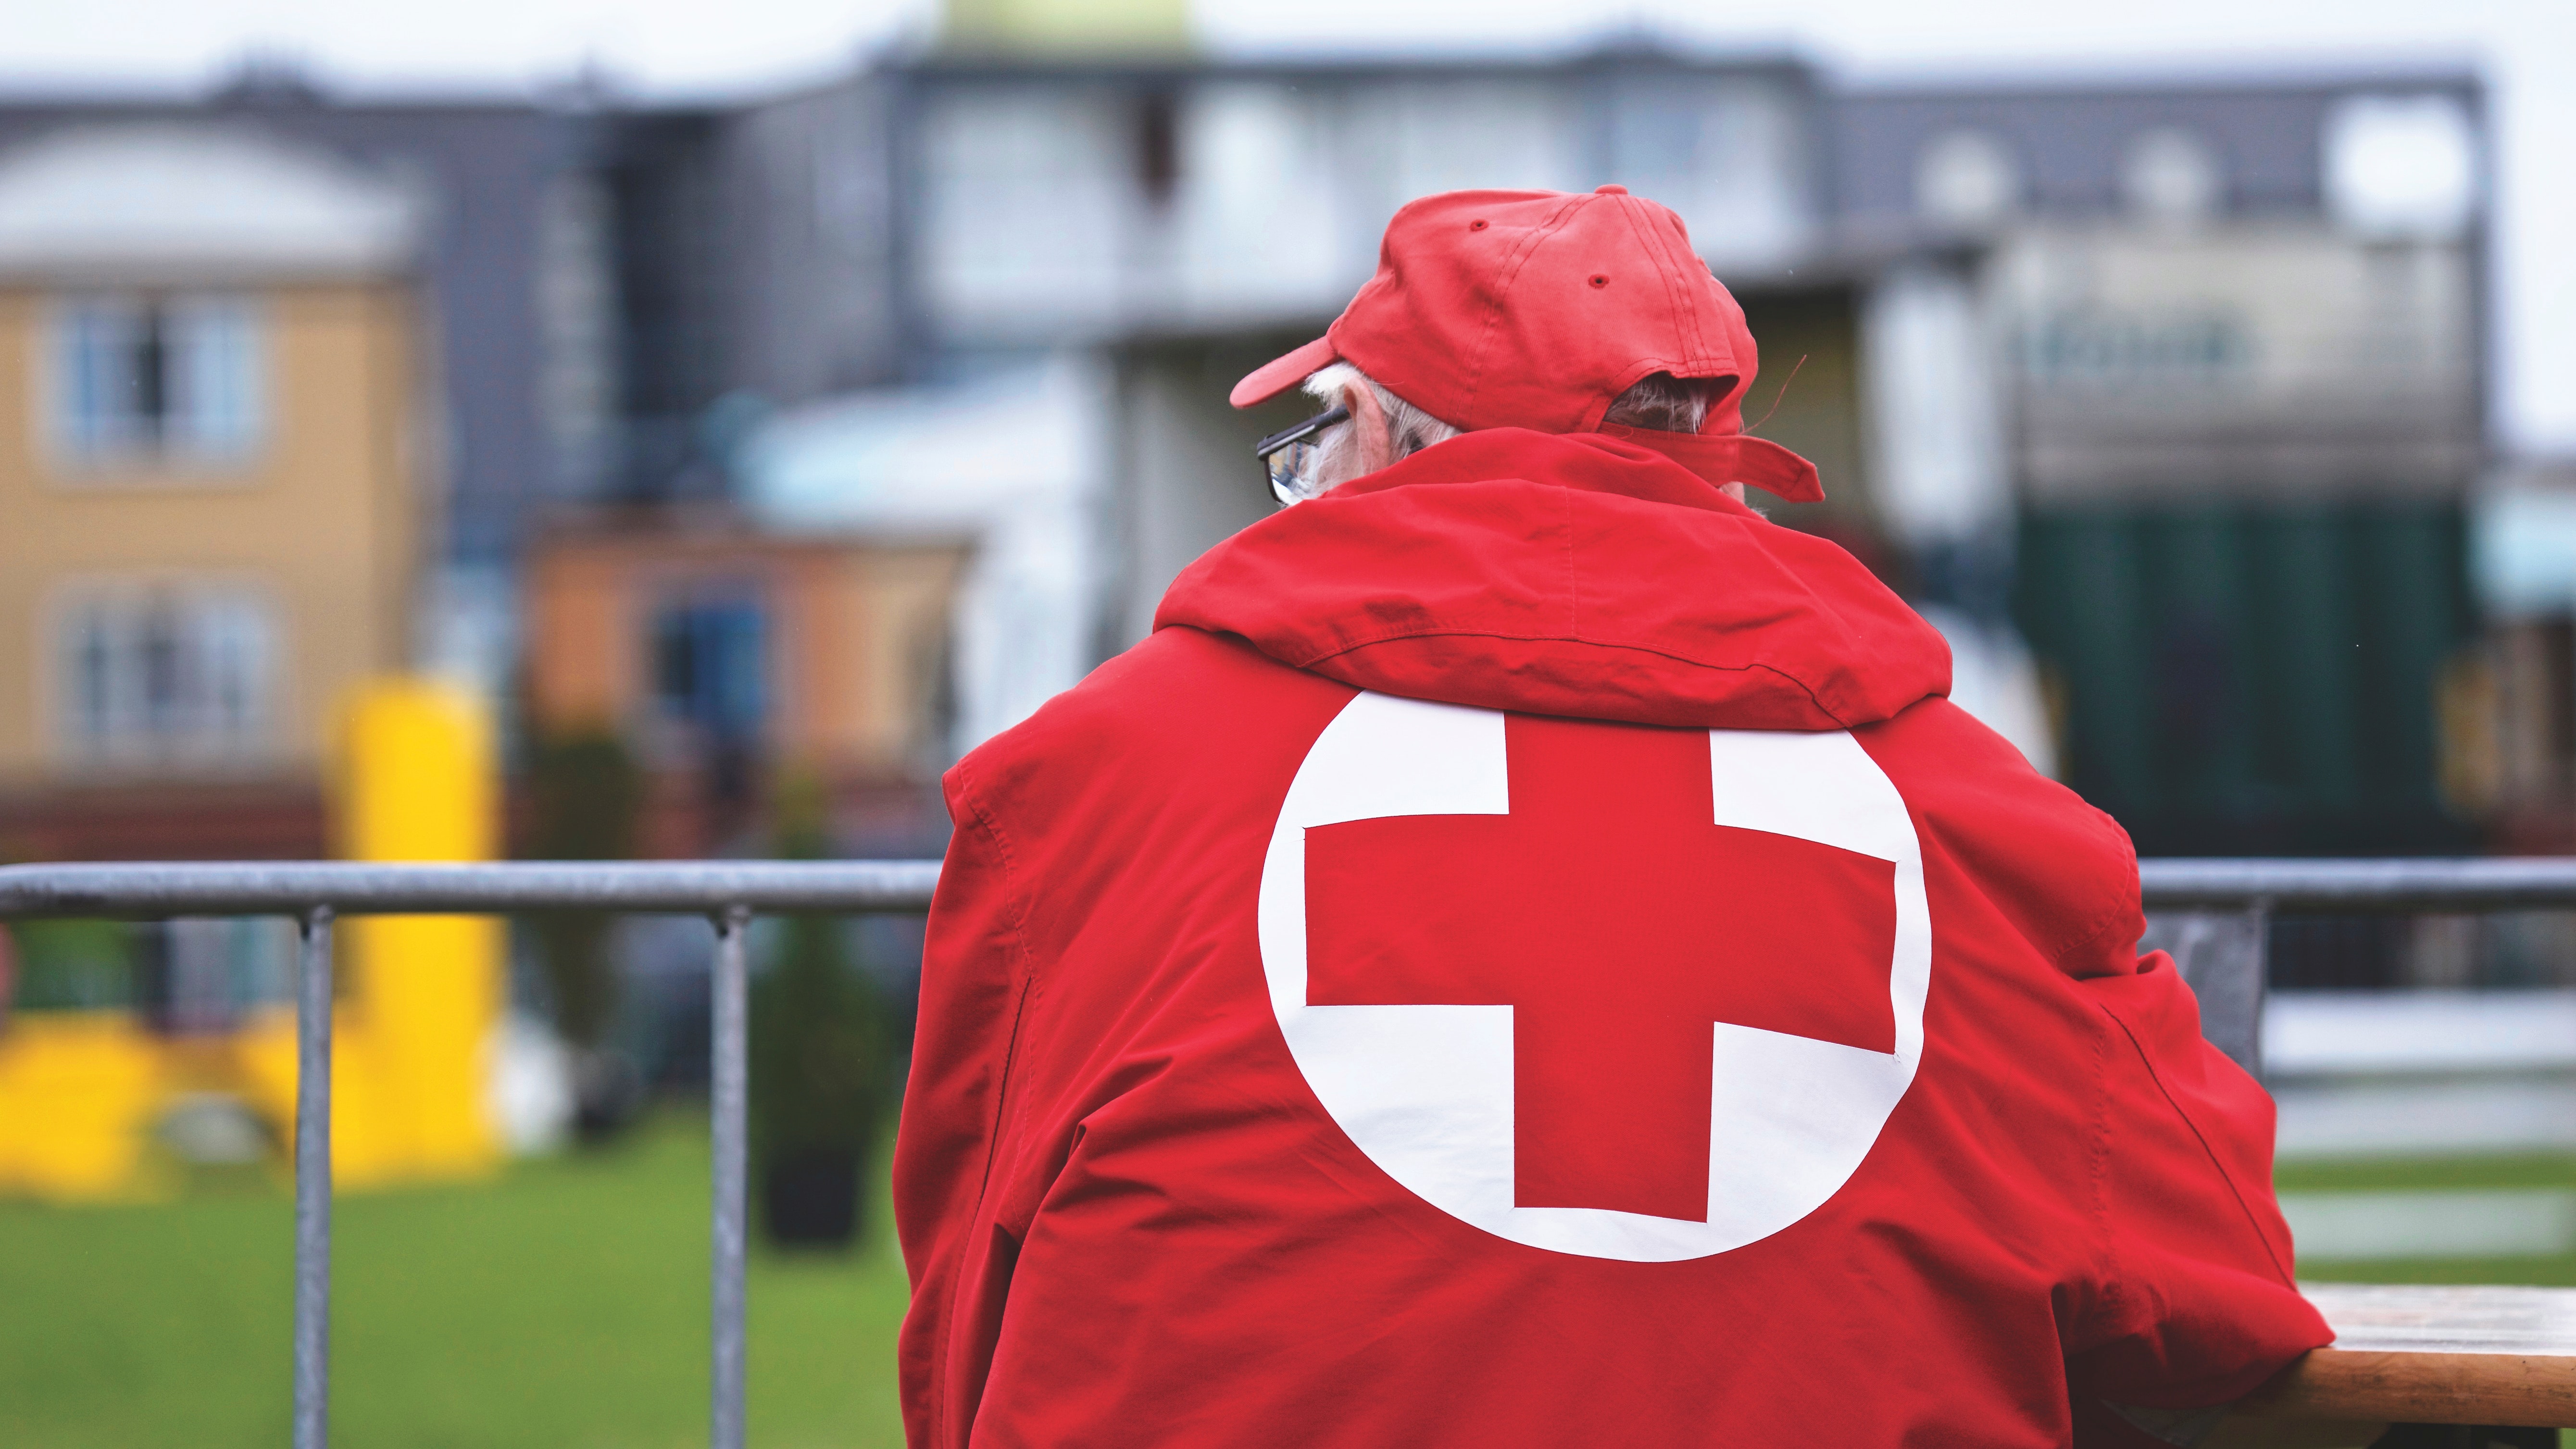 An older man in a red jacket with the Red Cross logo on his back looks out onto a field